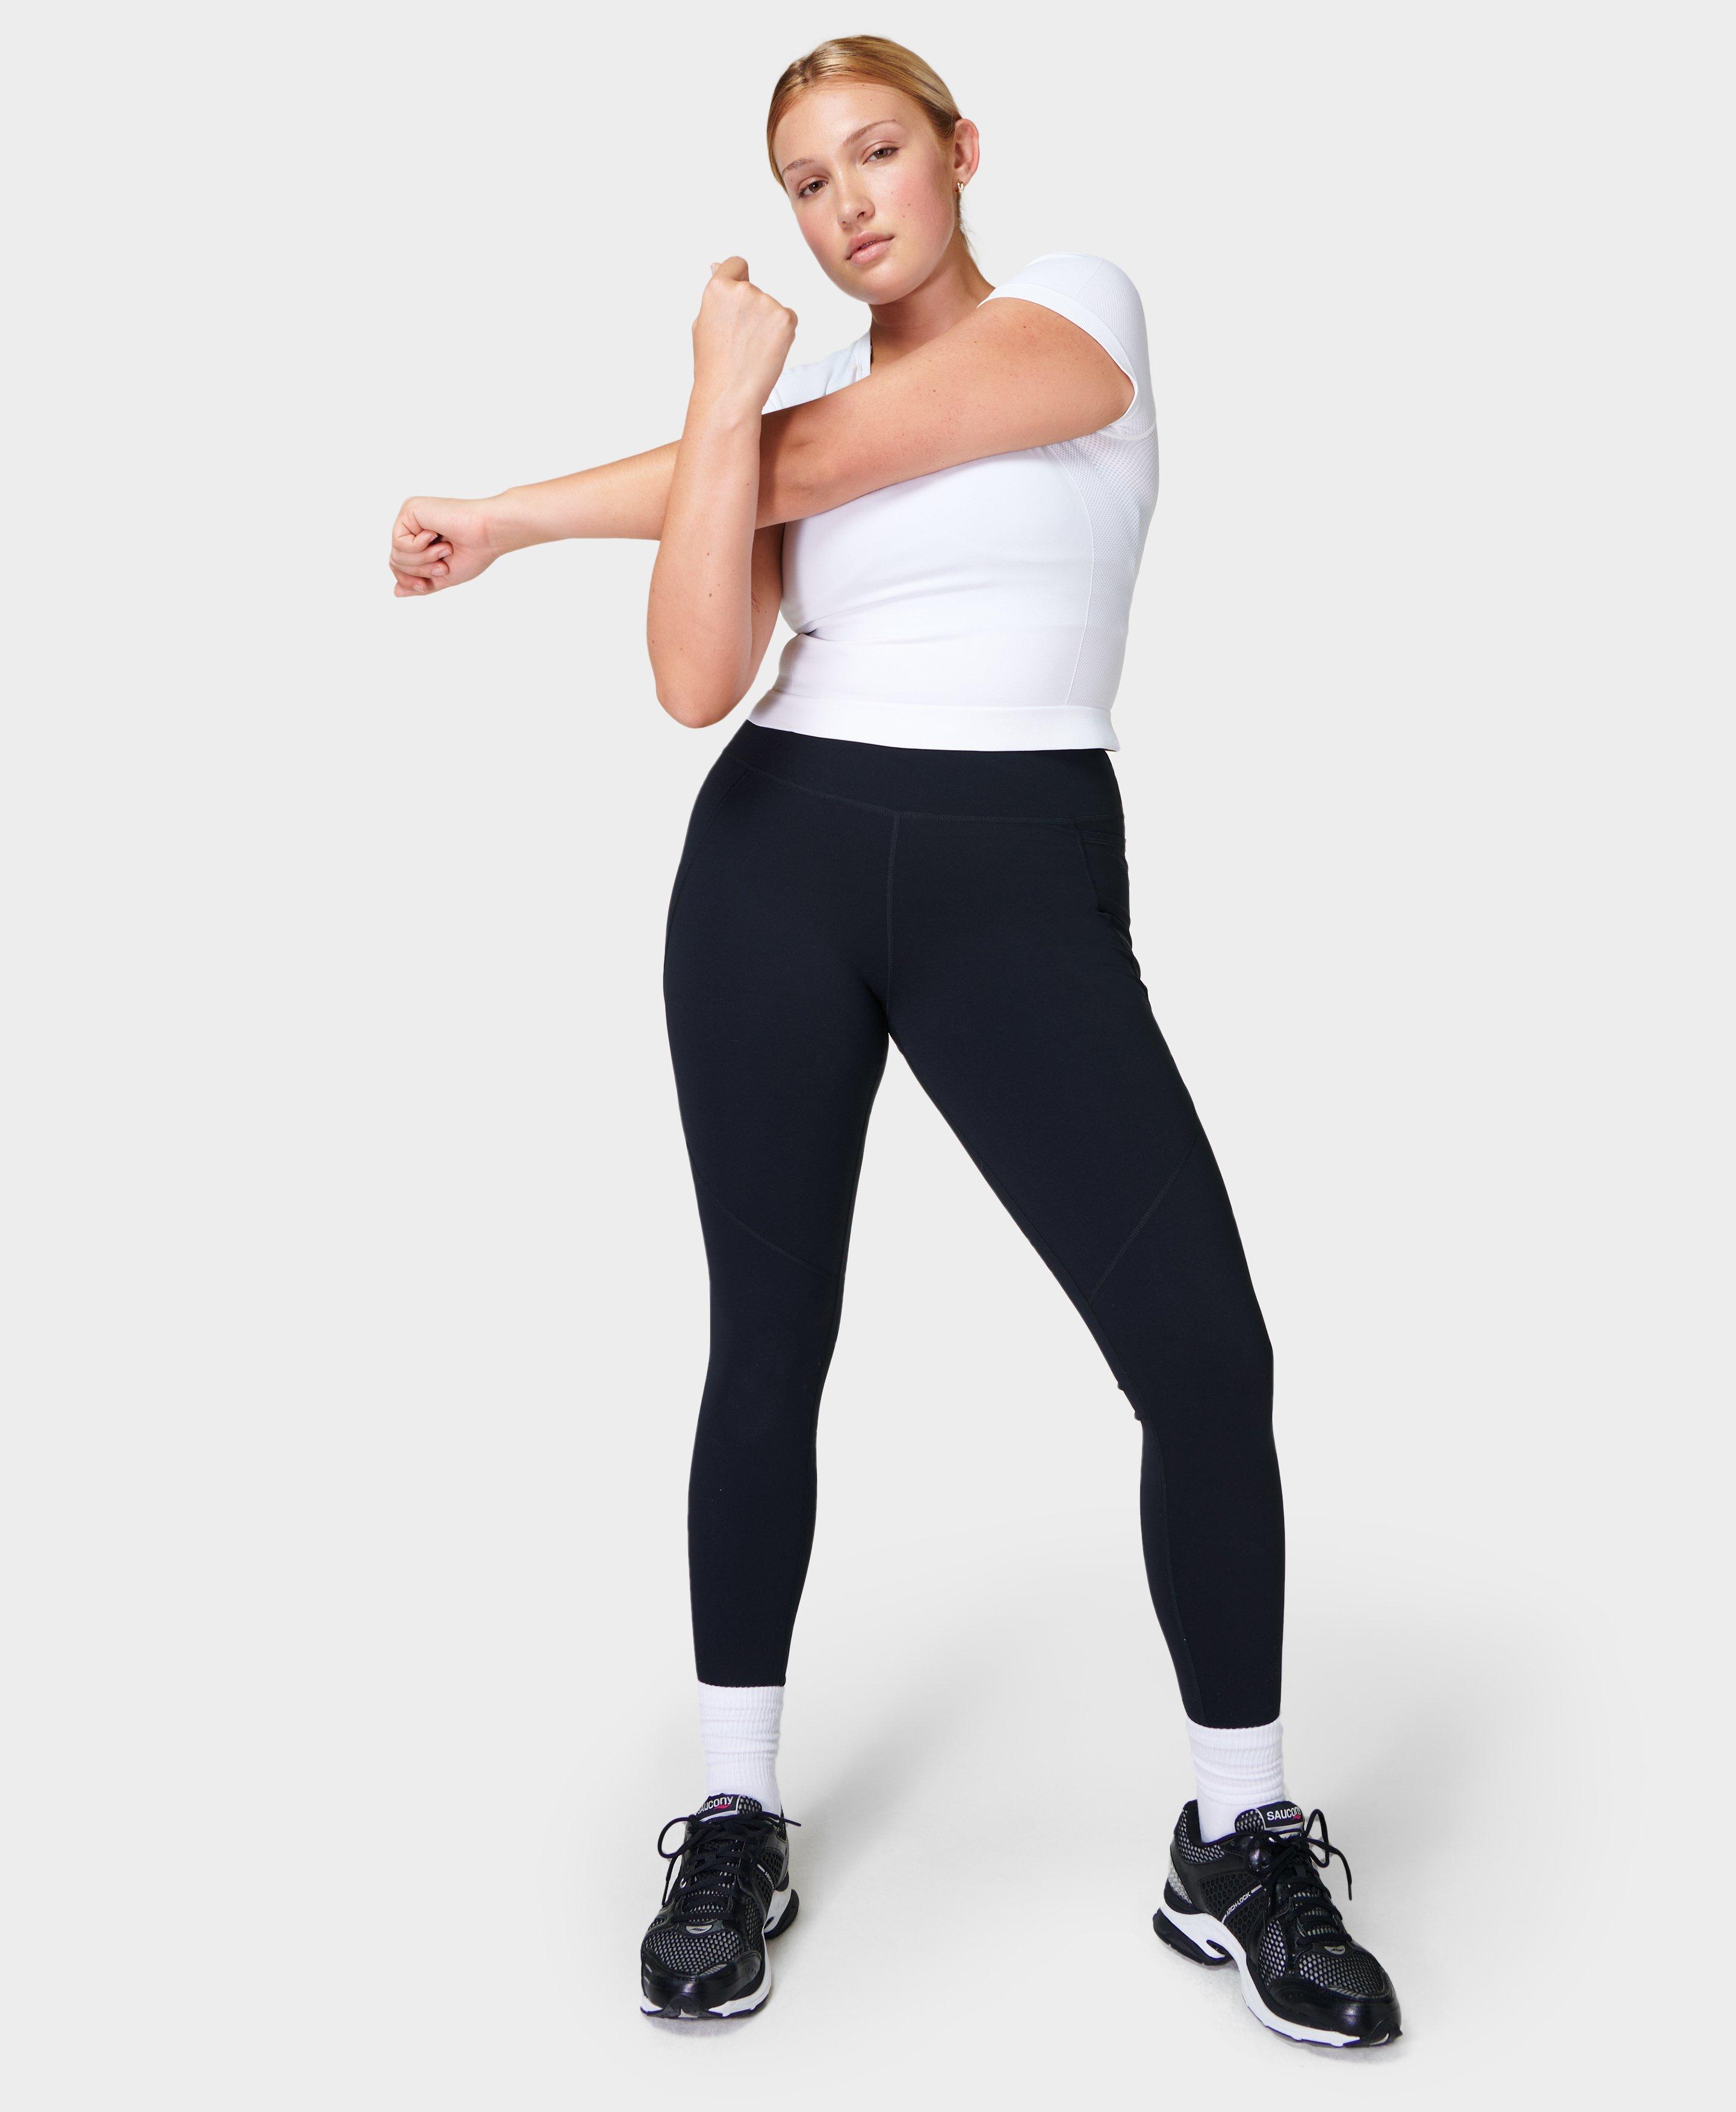 These Leggings Will Change Your Workout  Sweaty betty, Fitness fashion,  Under armour brand